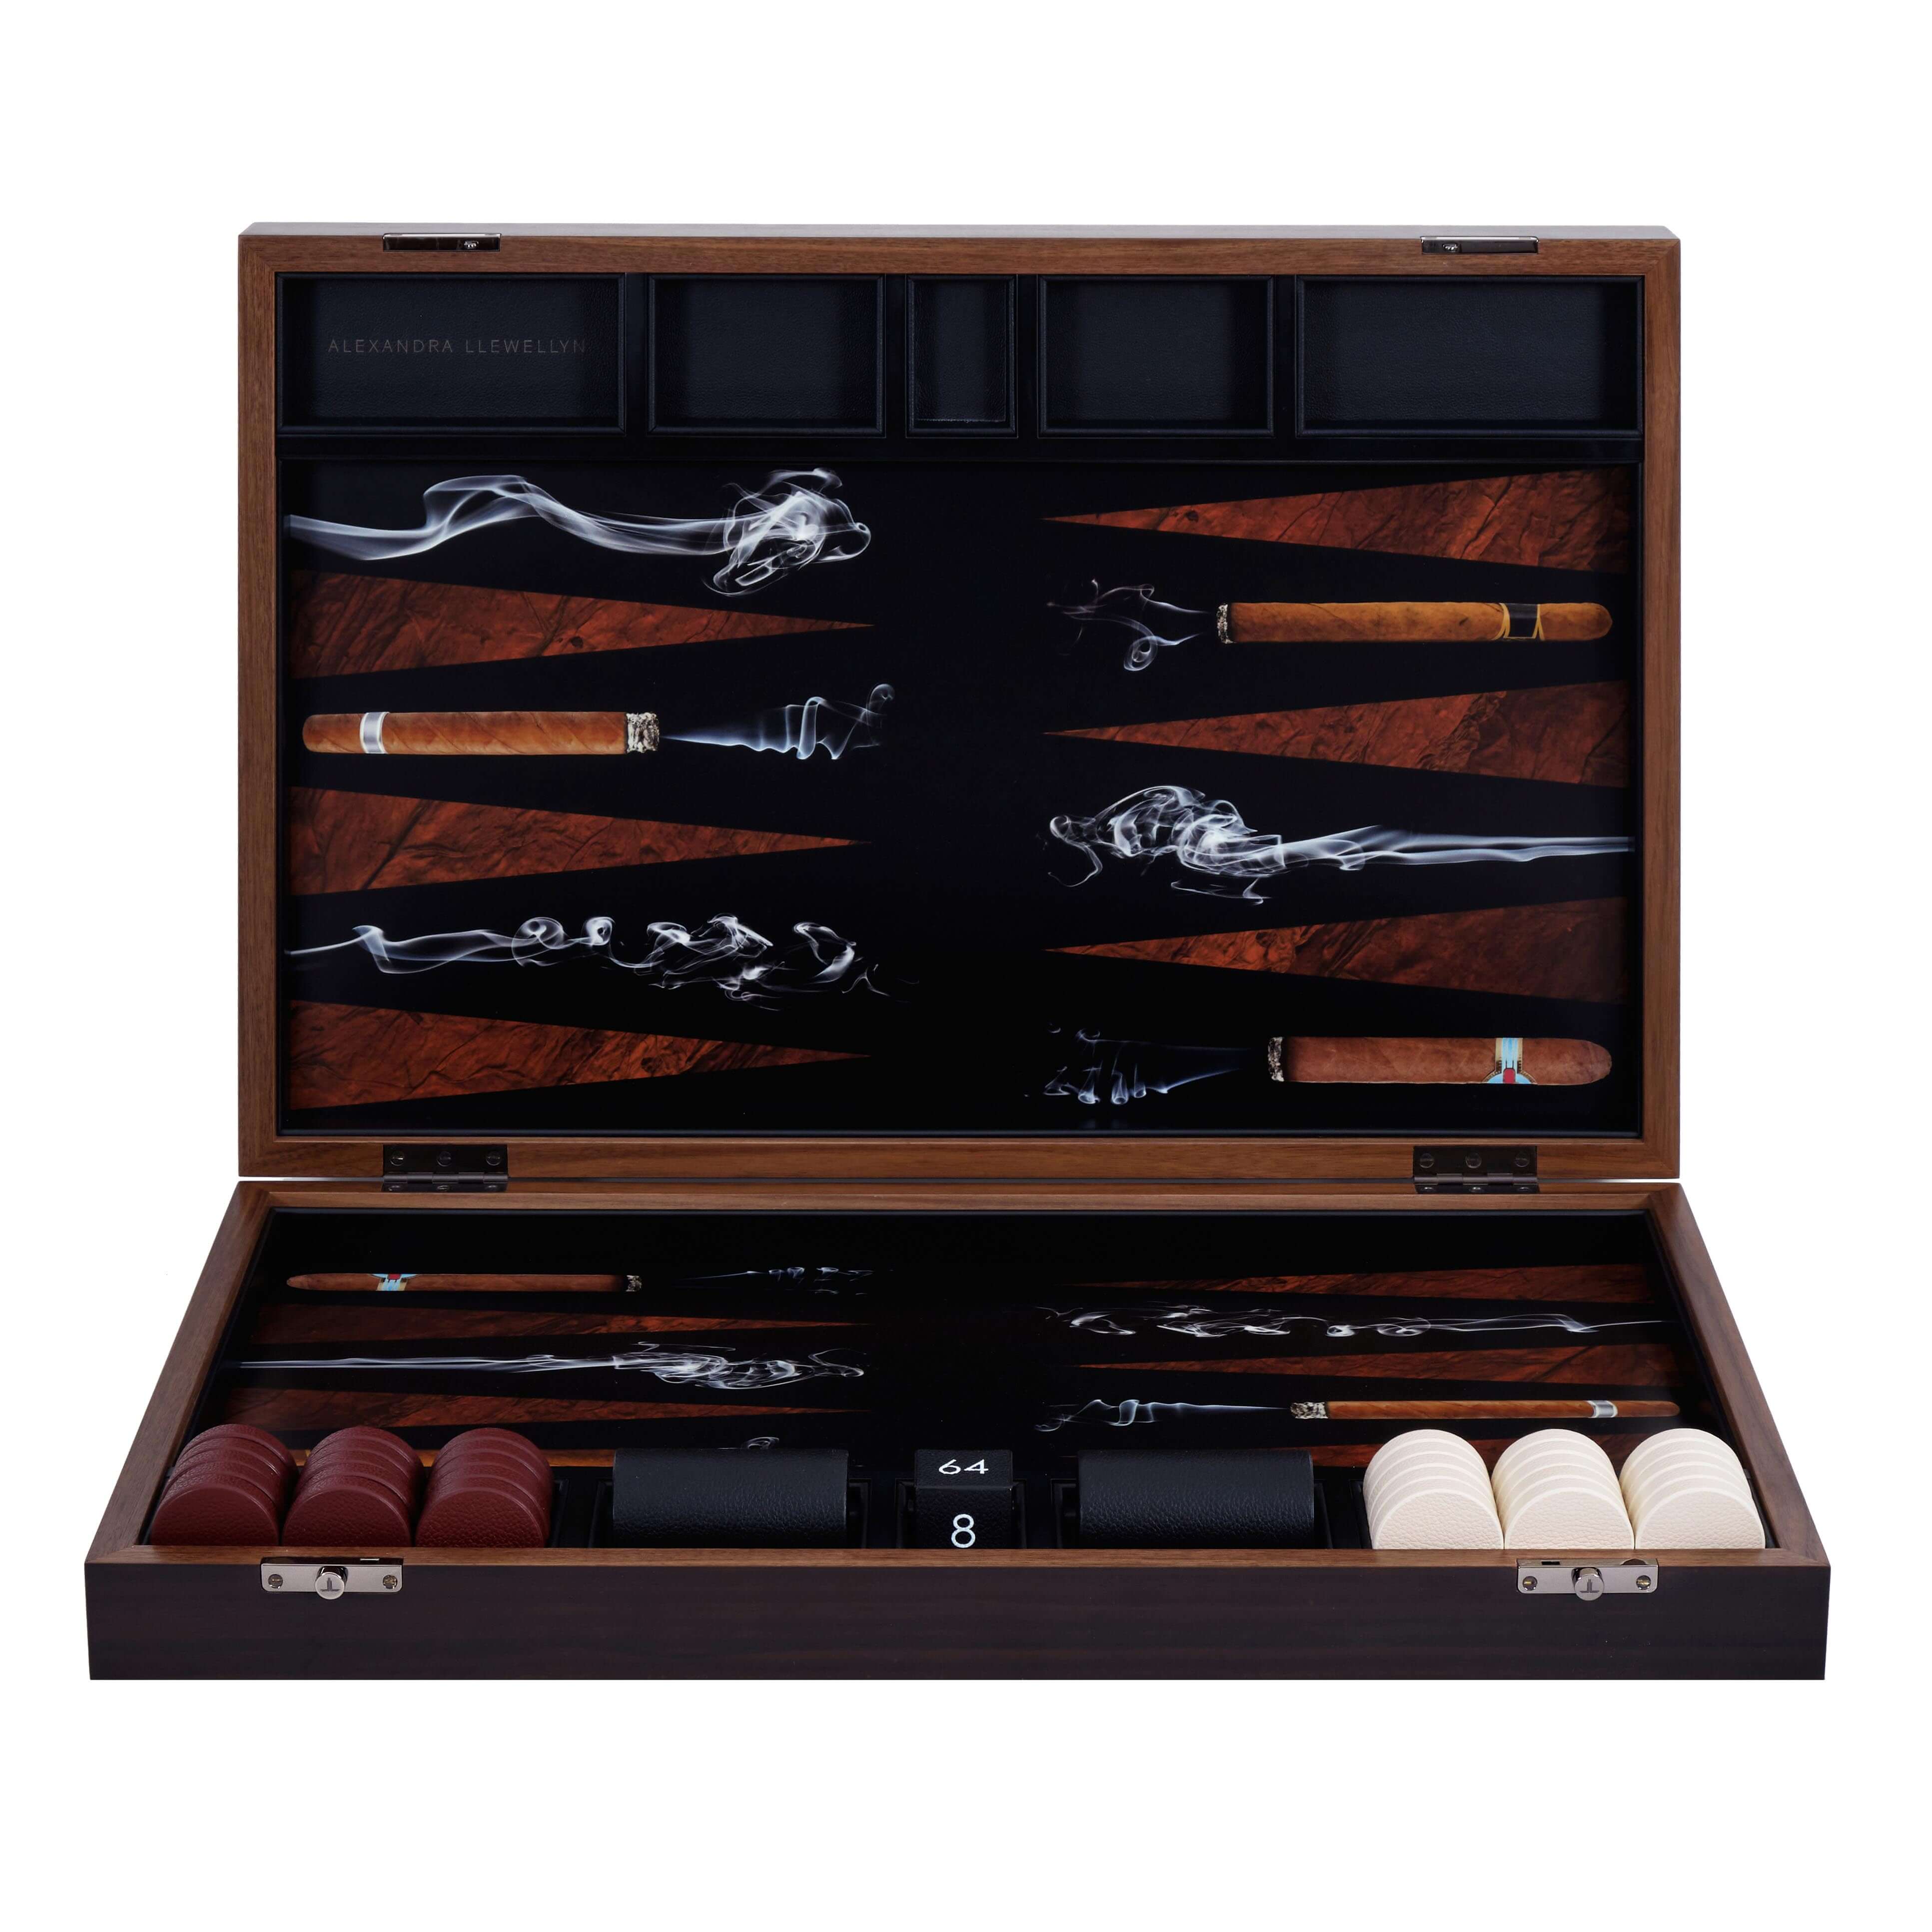 Cigar backgammon board in a Fumed Eucalyptus box with red and cream leather pieces